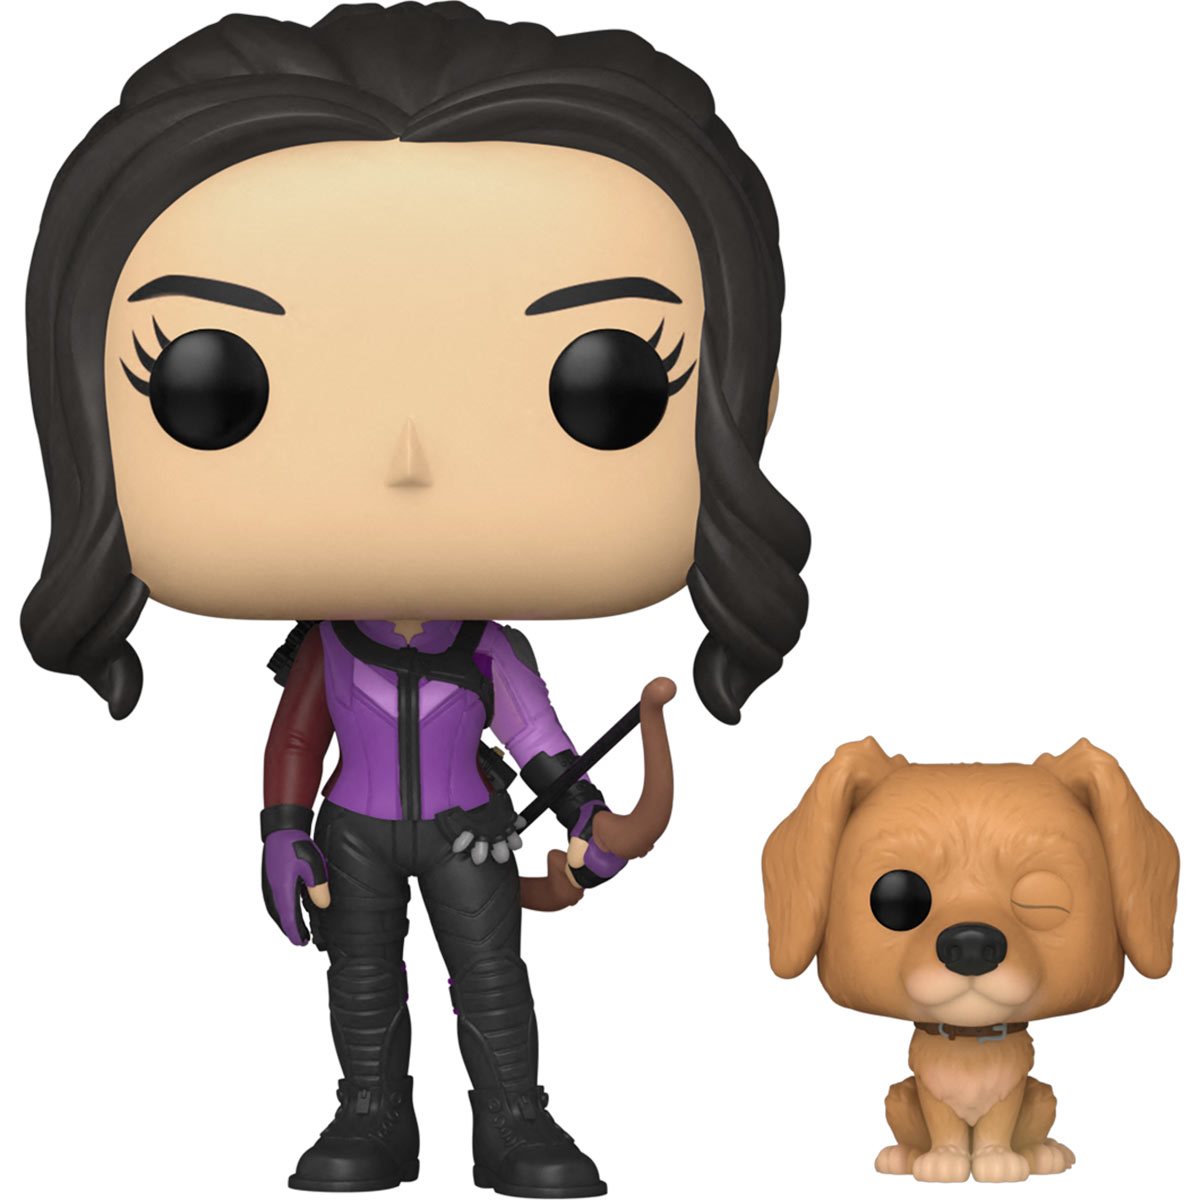 Kate Bishop with Lucky the Pizza Dog Funko Pop! Vinyl Figure #1212-1